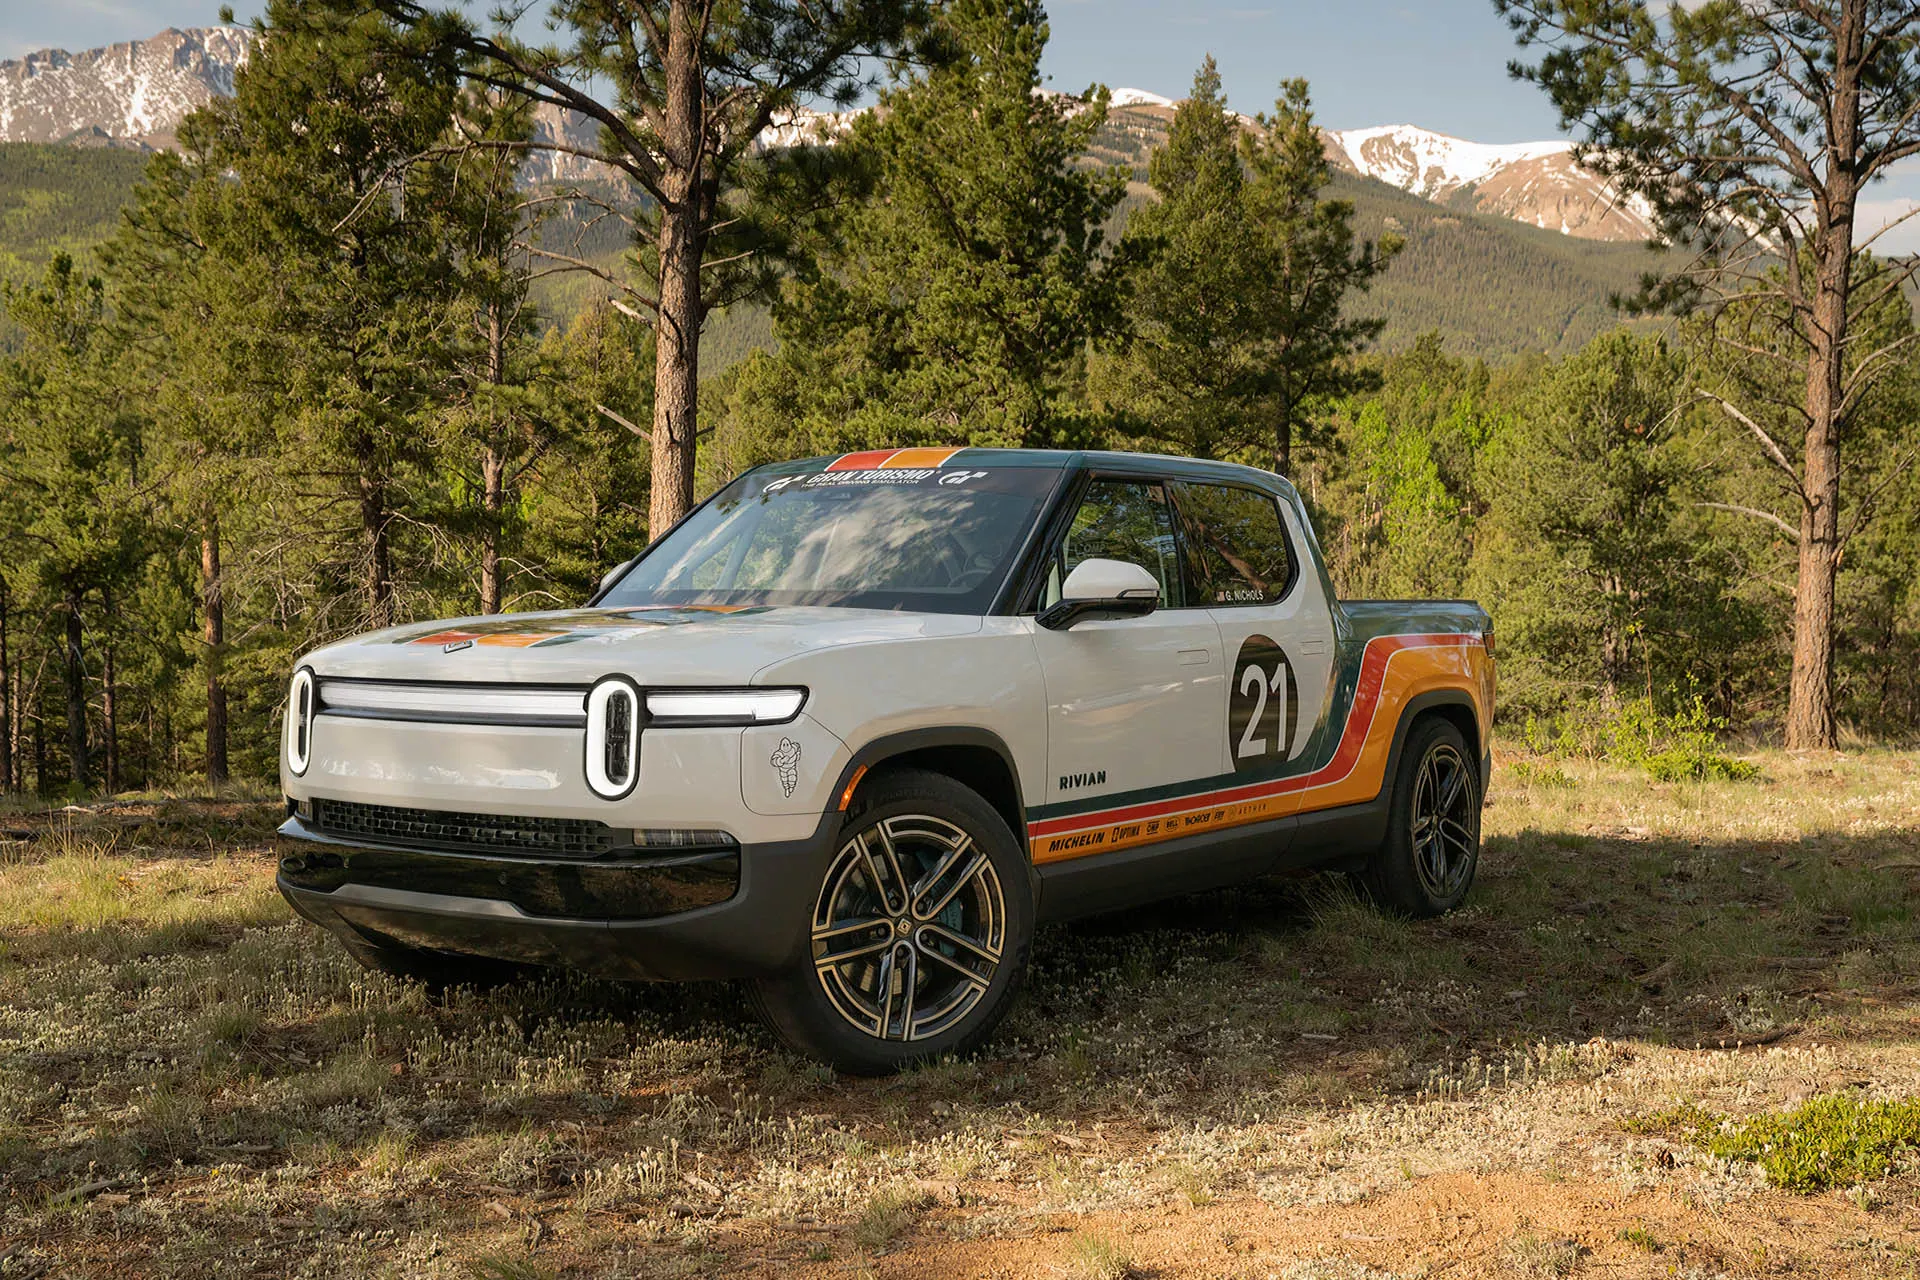 Rivian Sends New R1T Electric Pickup Truck to Pikes Peak Race